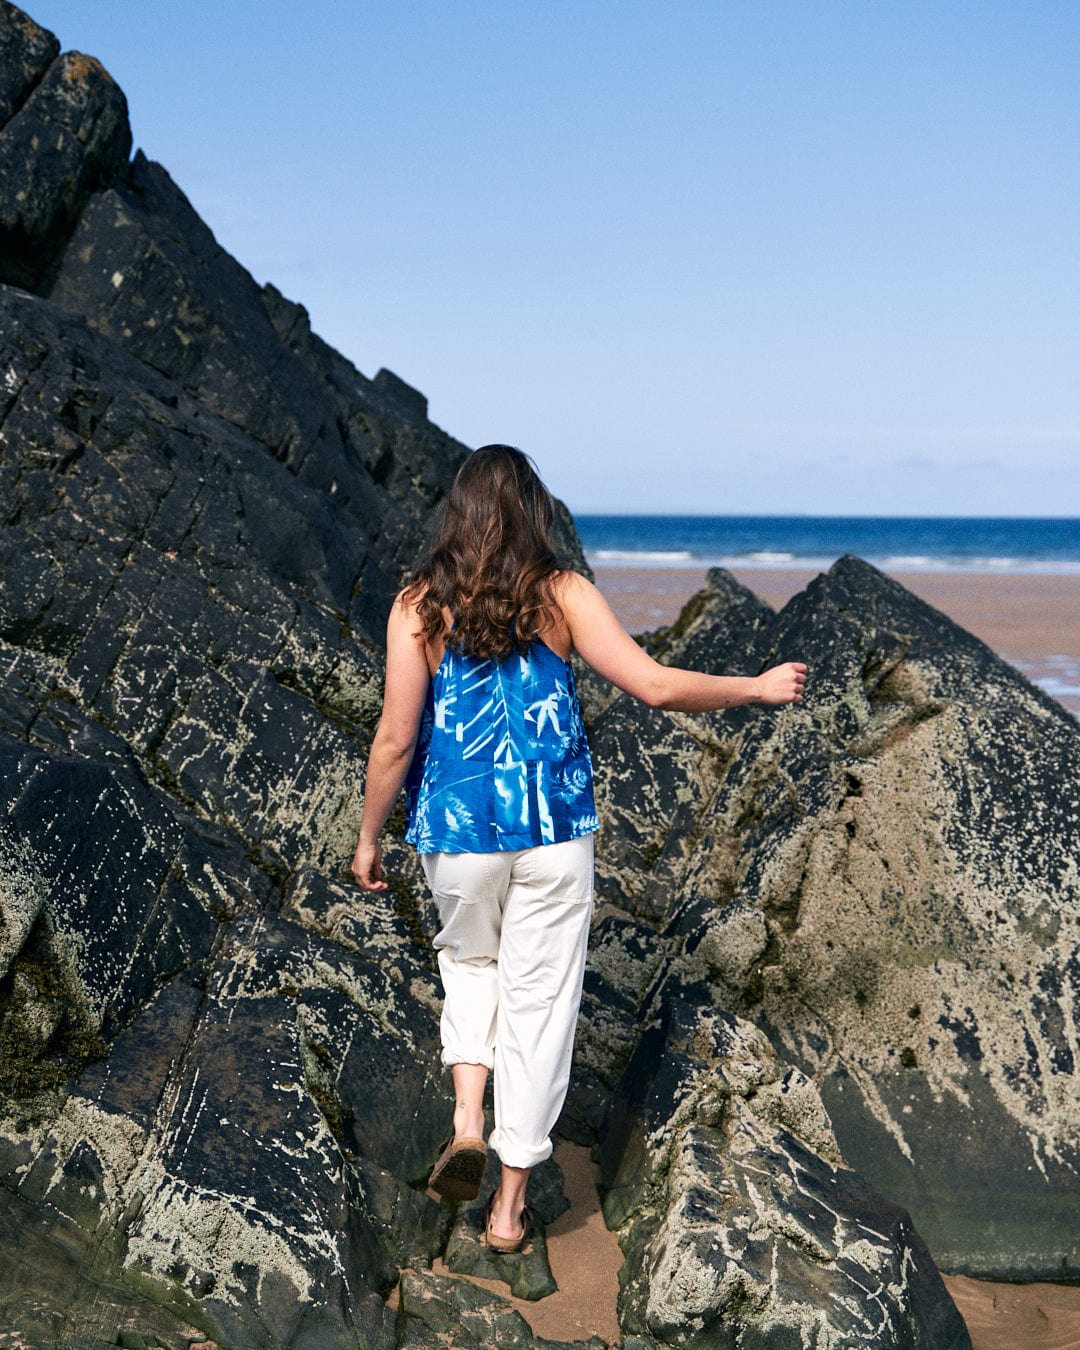 A person in a Saltrock Cyanotype - Womens Cami - Blue and white pants made of lightweight material walks on uneven, rocky terrain near a beach on a clear day.